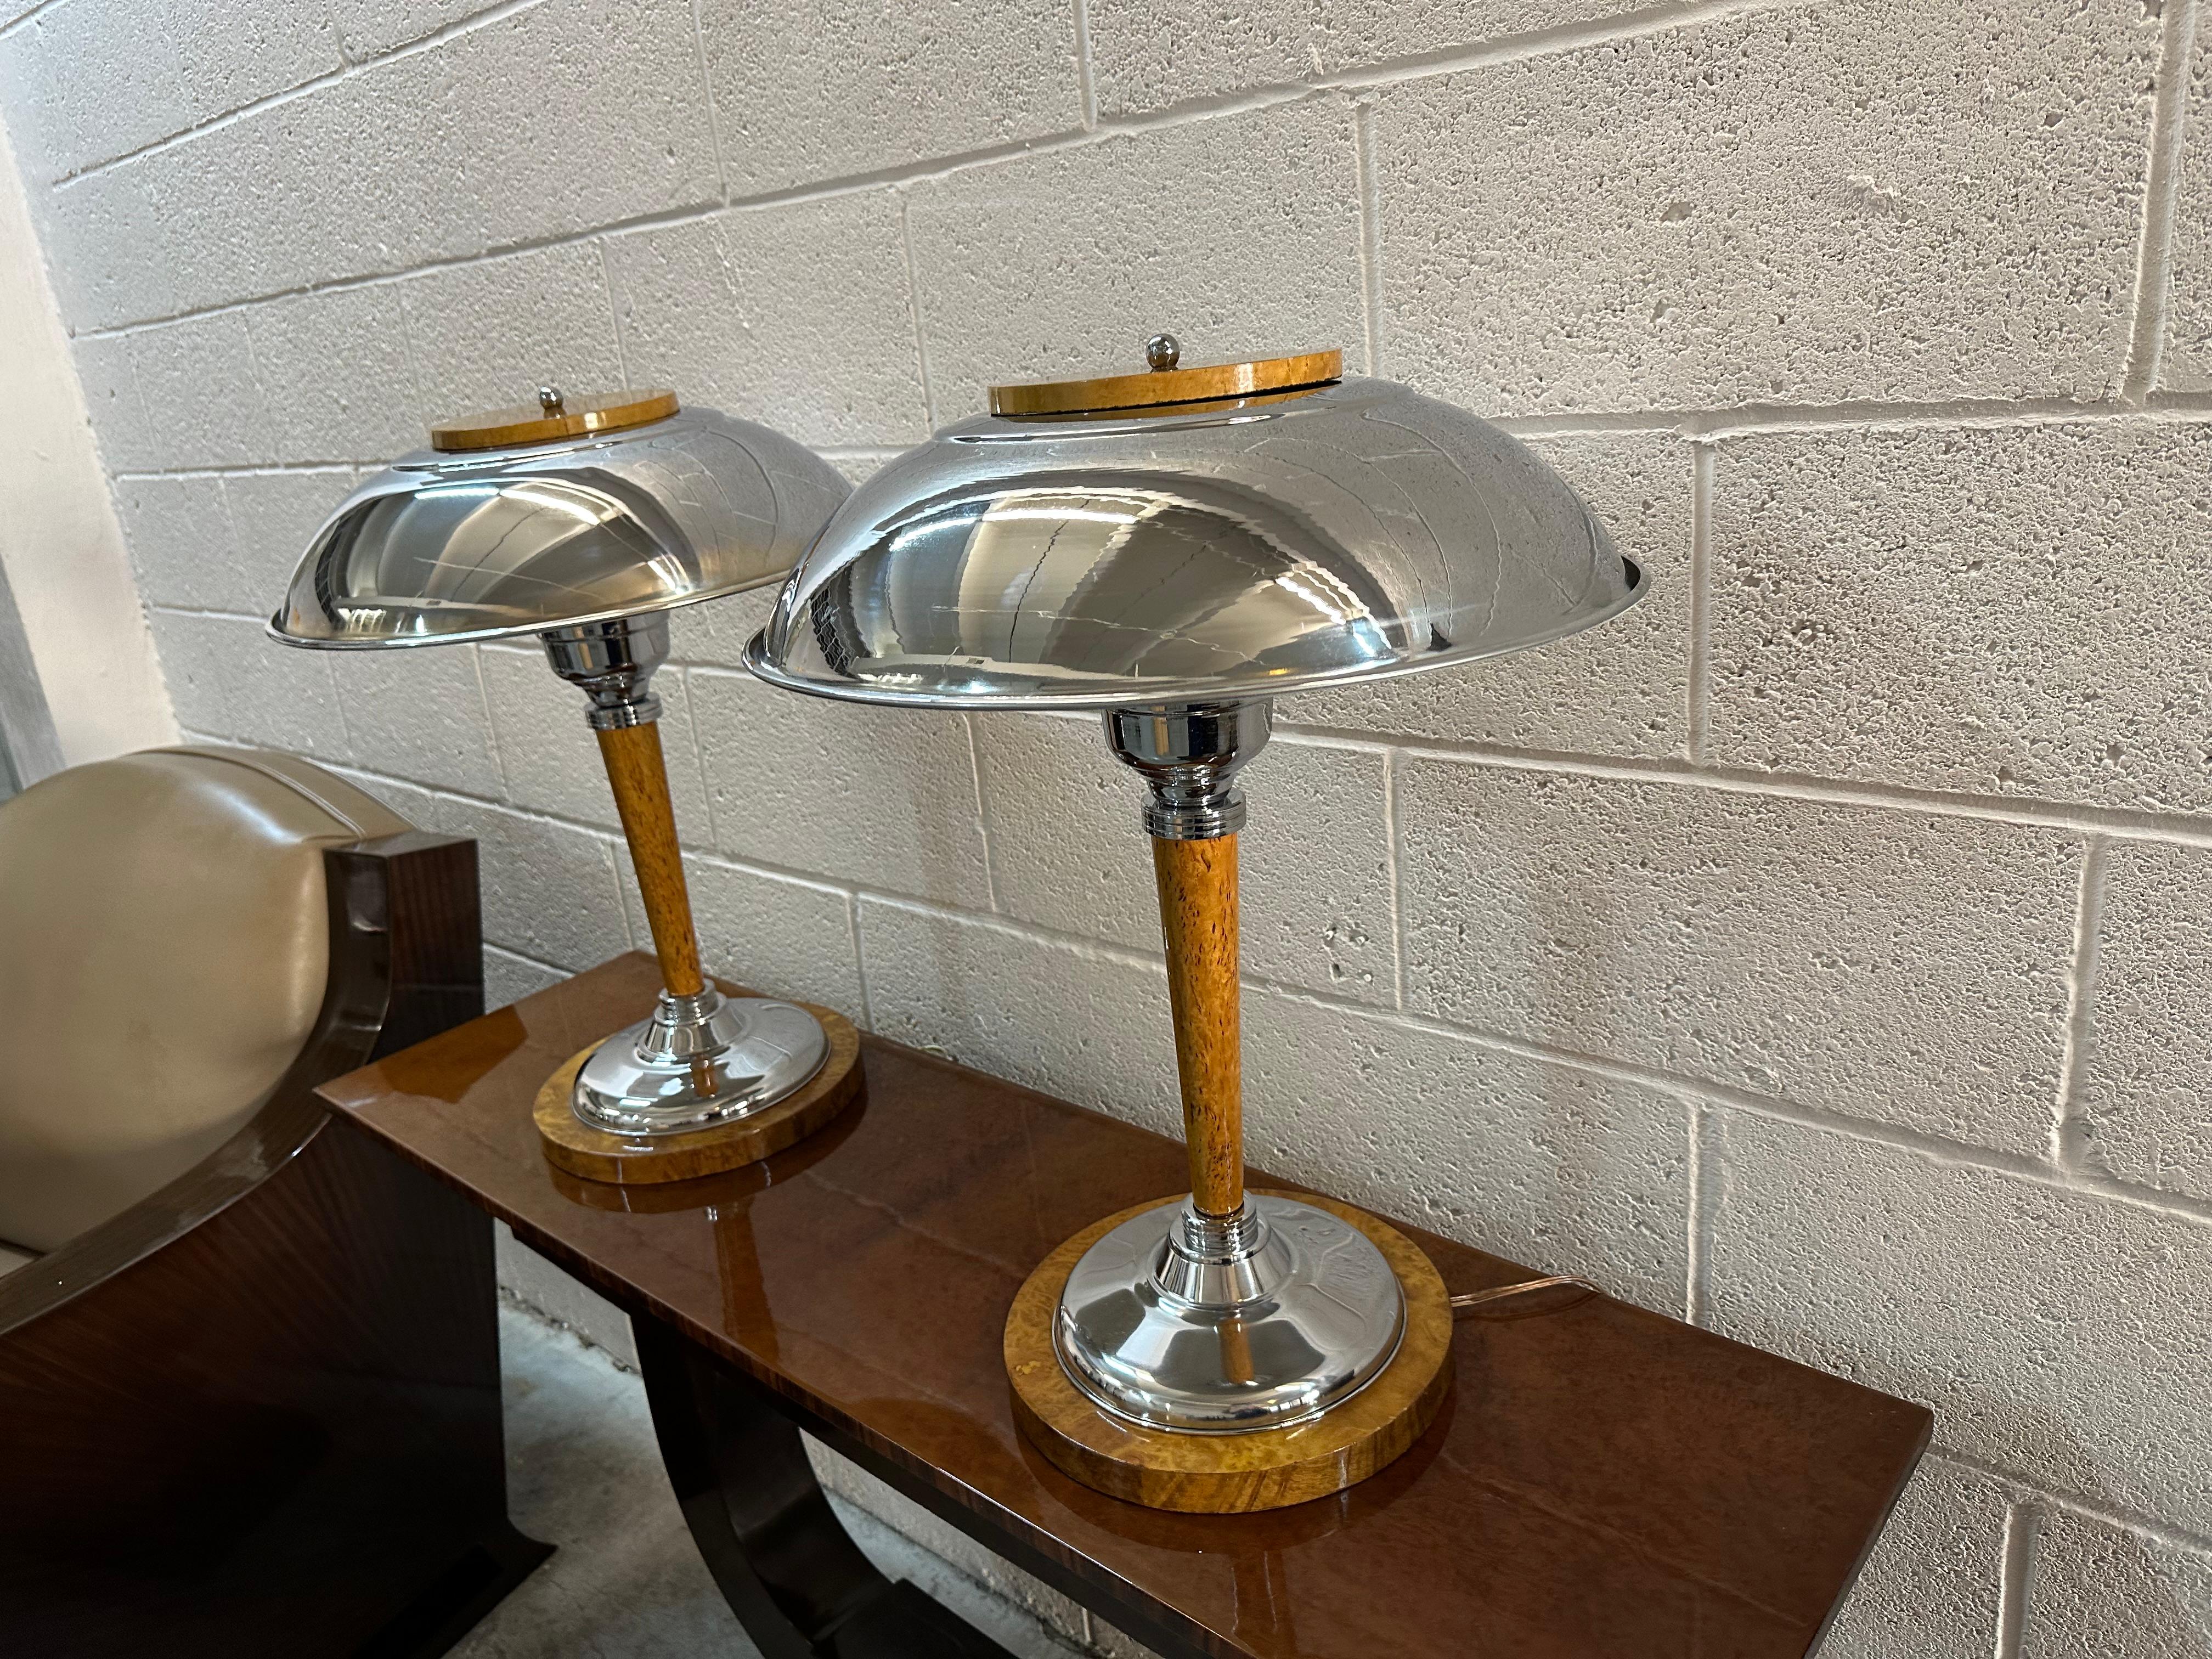 Pair of Art Deco Table Lamps in wood and chrome, 1920, France For Sale 12